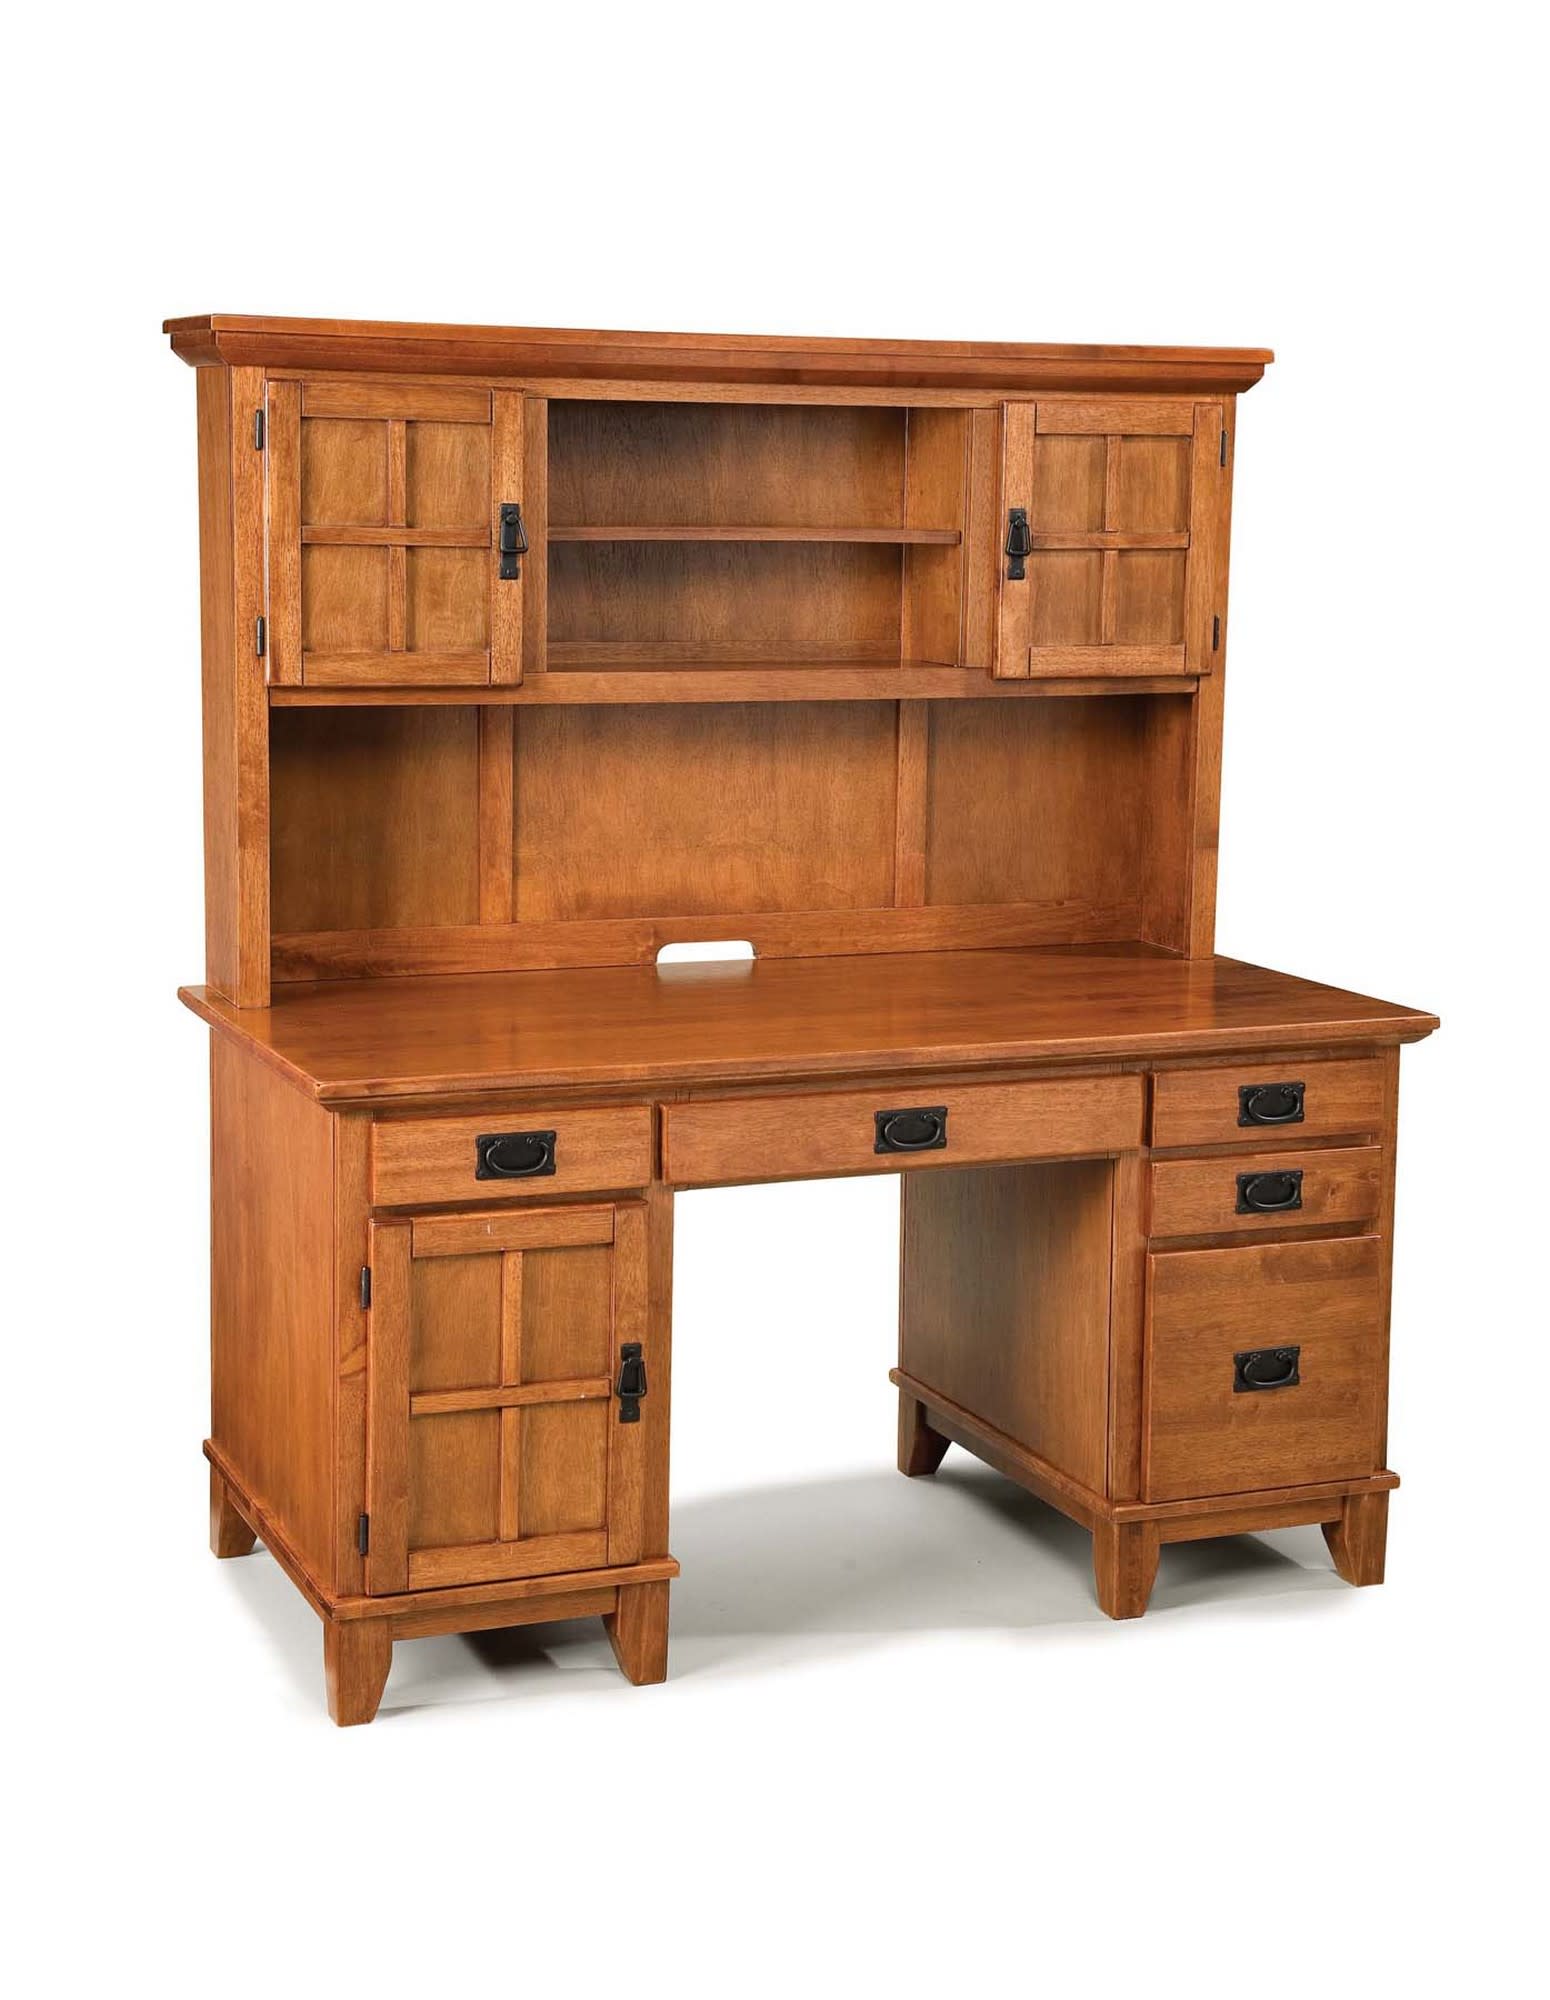 Arts and Crafts Pedestal Desk and Hutch Cottage Oak Finish by Homestyles - image 1 of 2